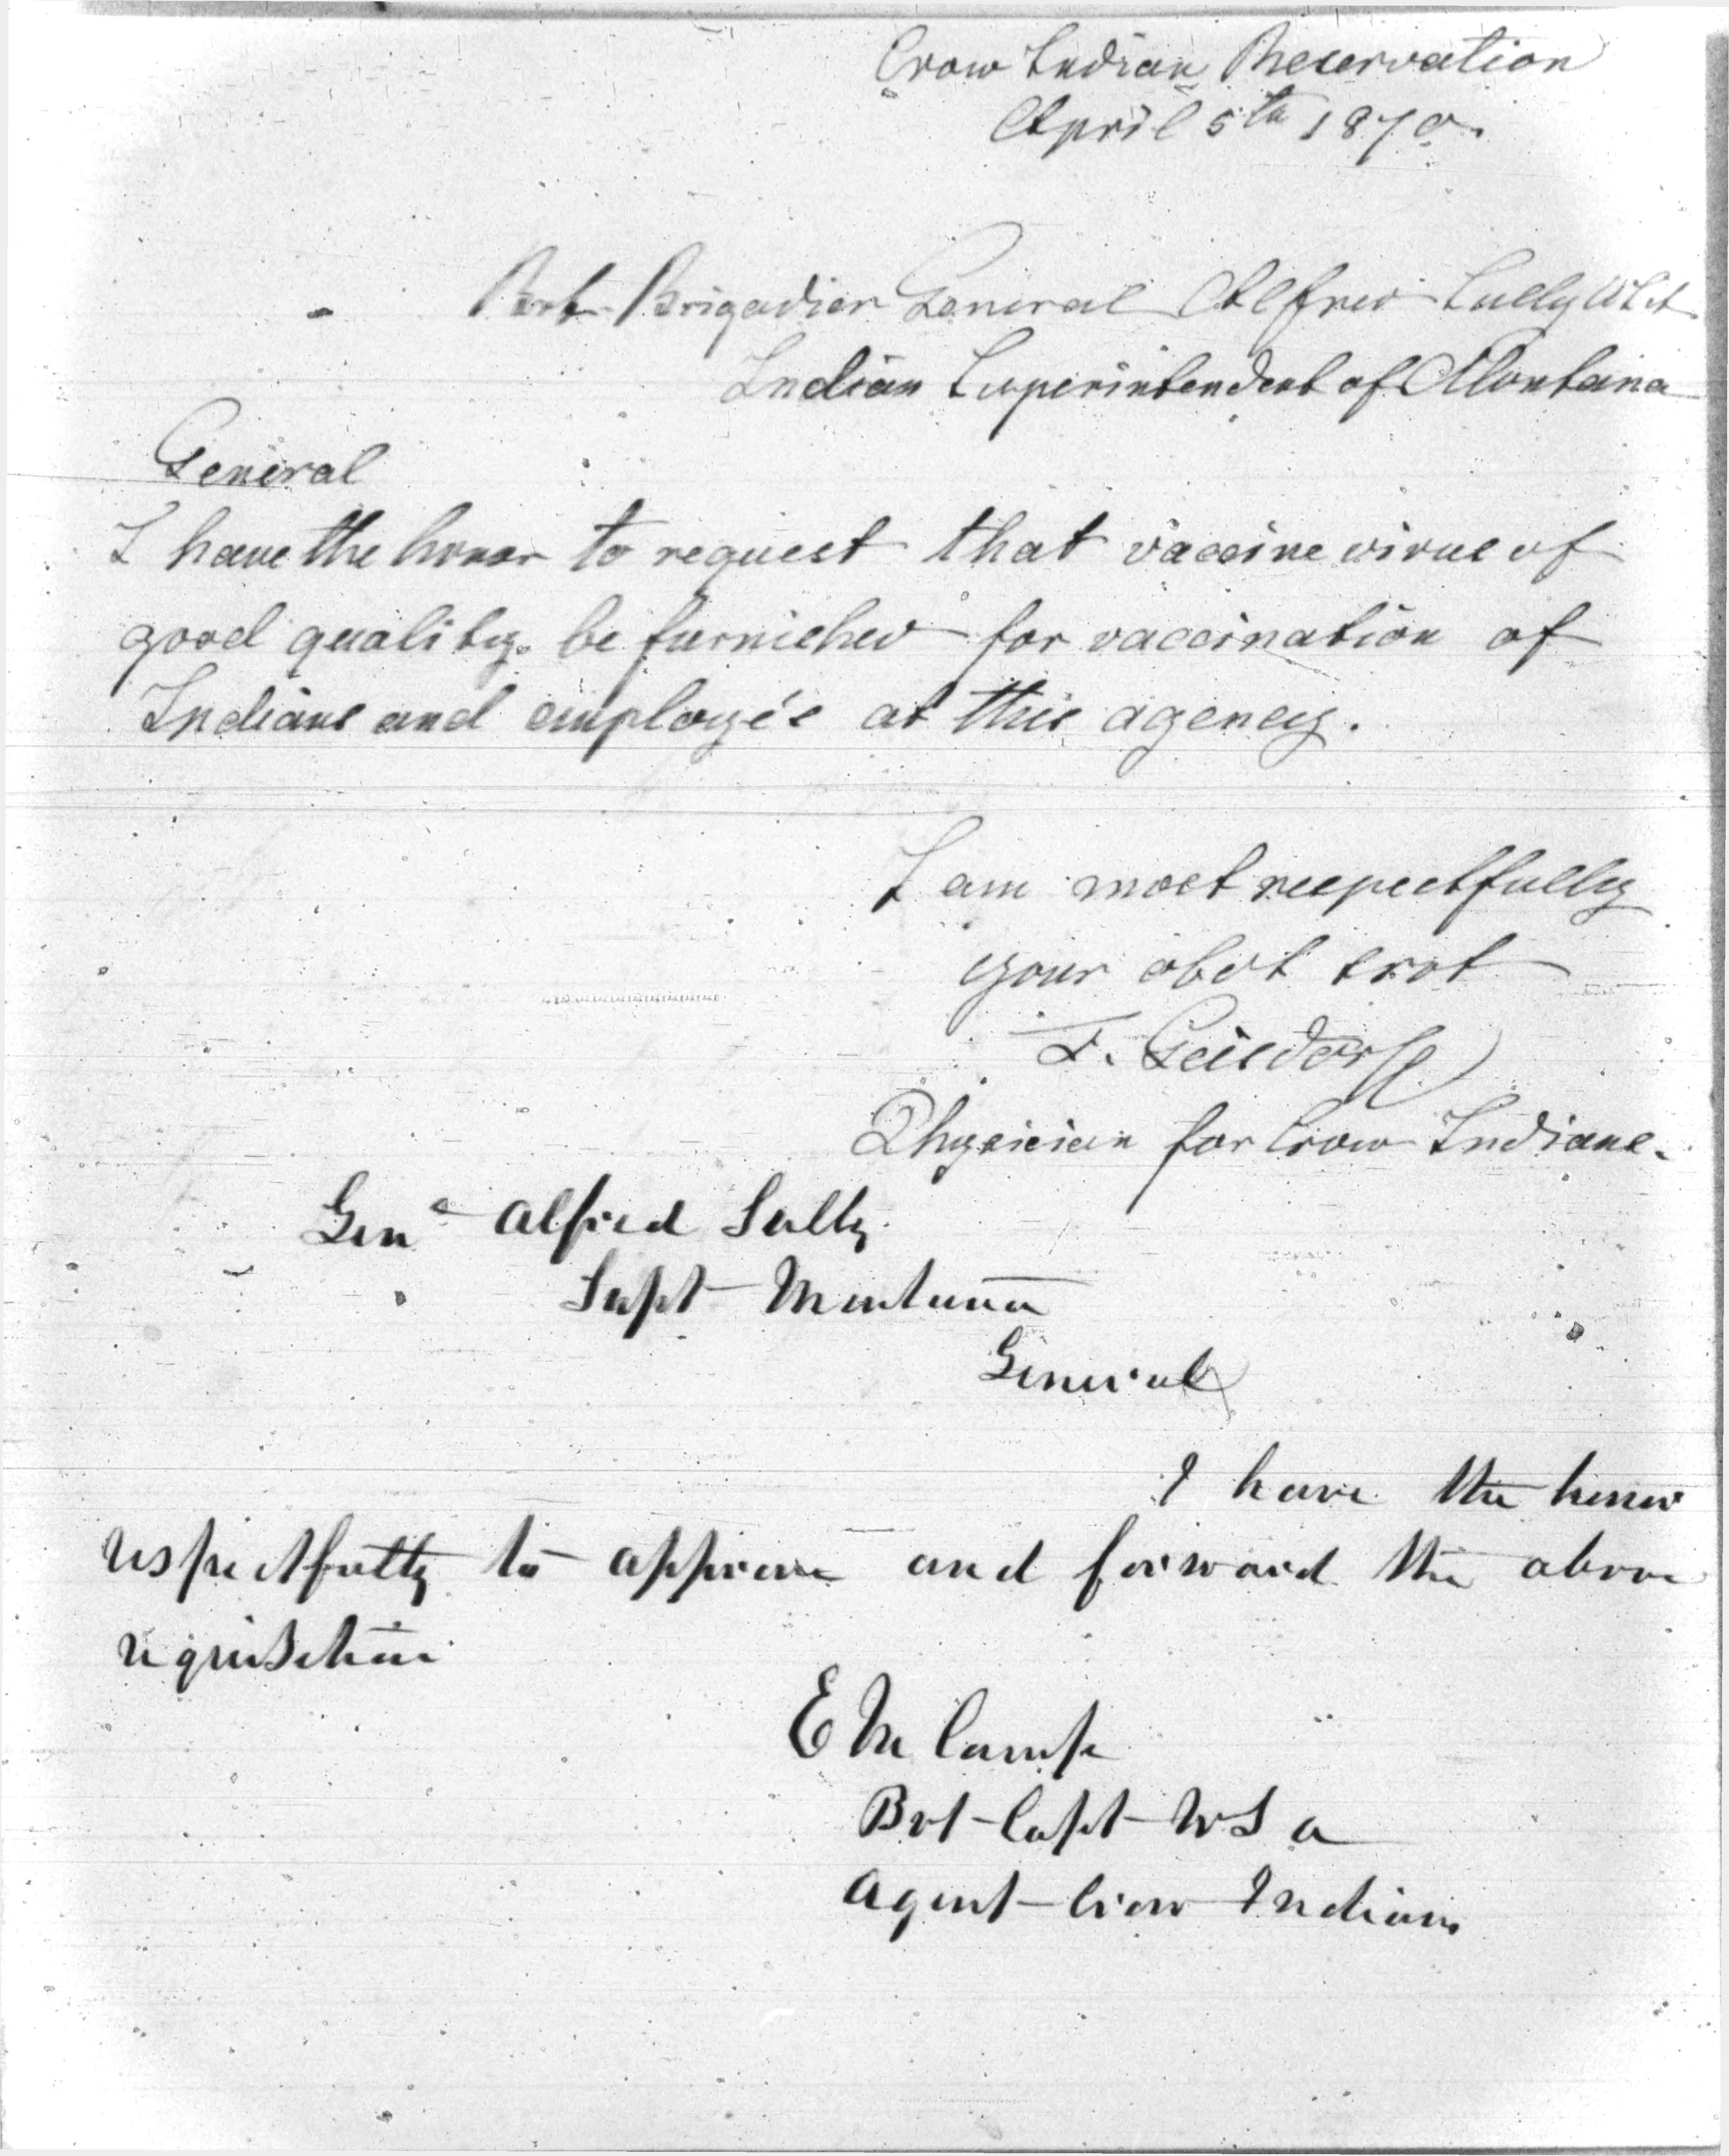 Letter from Thomas Hartley Crawford to William Armstrong, March 22, 1839